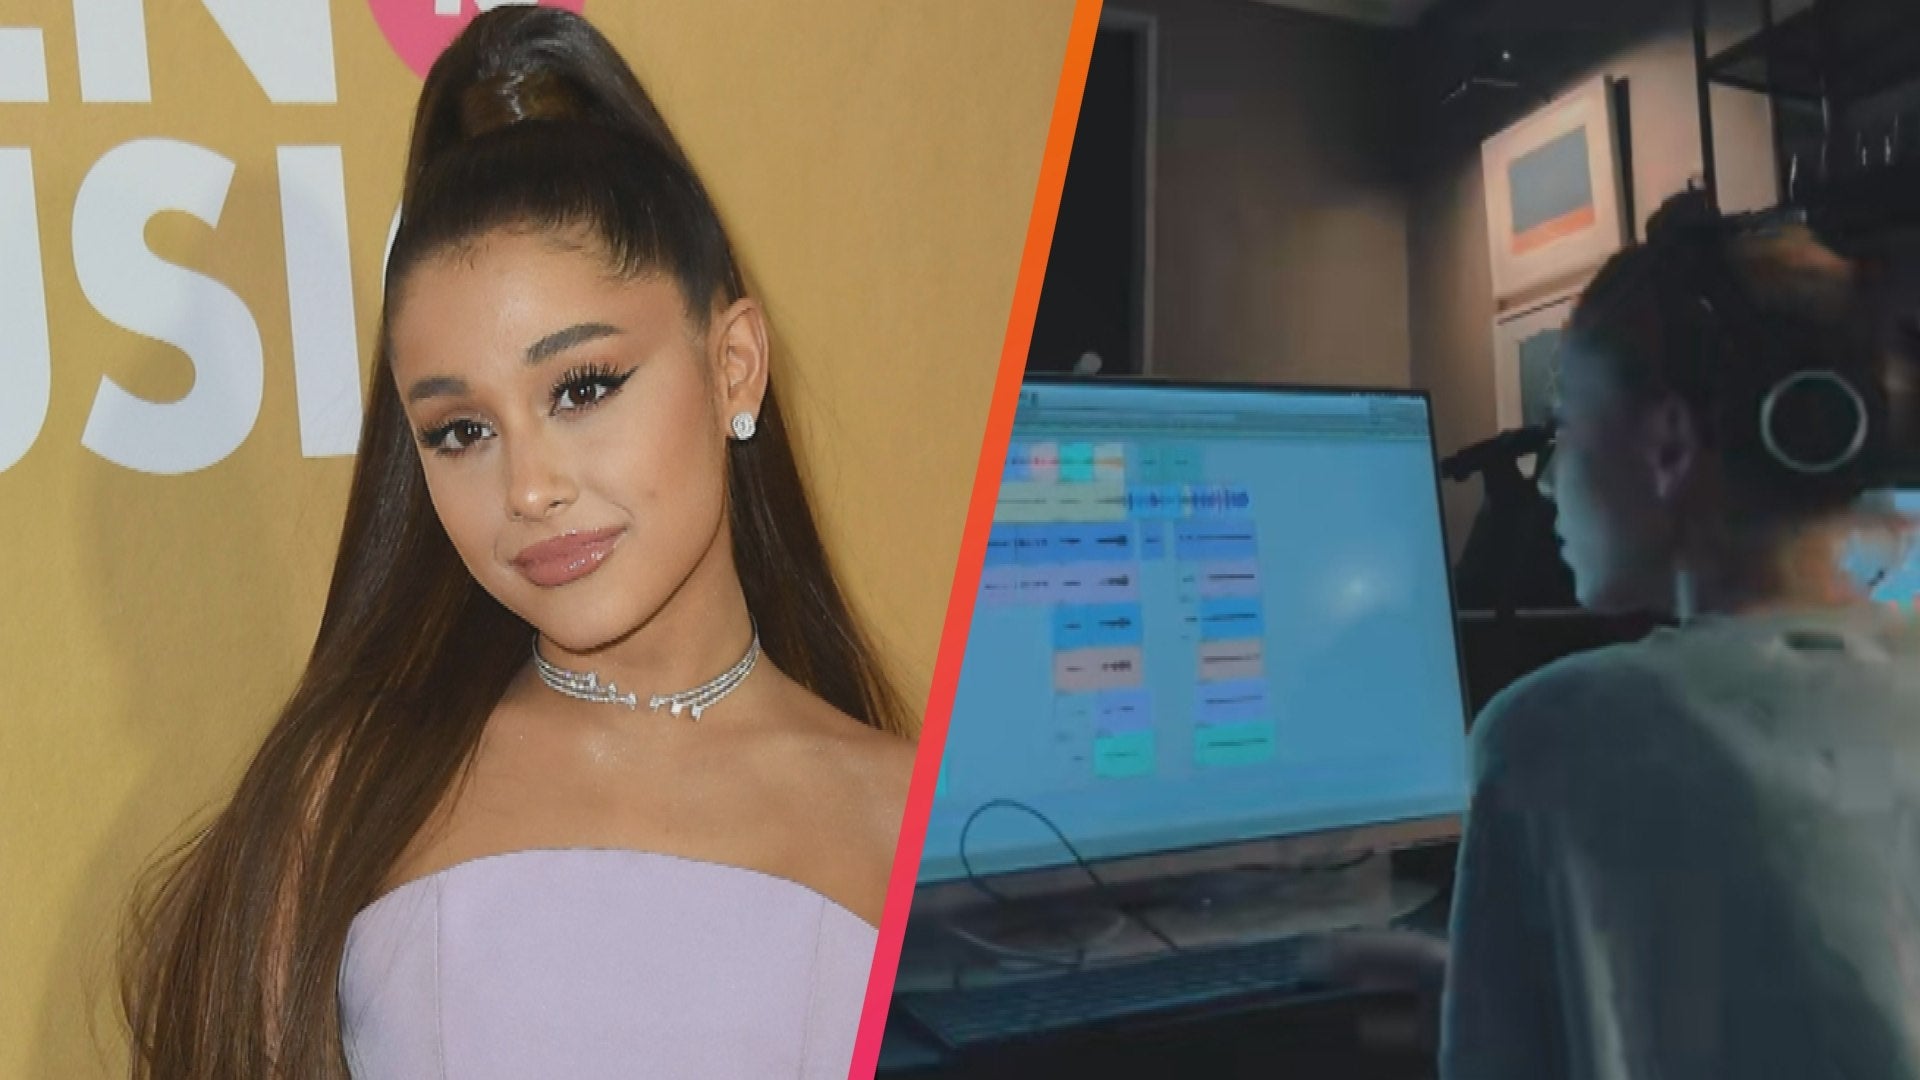 Ariana Grande Shares Behind-the-Scenes Look Making New Music With The Weeknd 